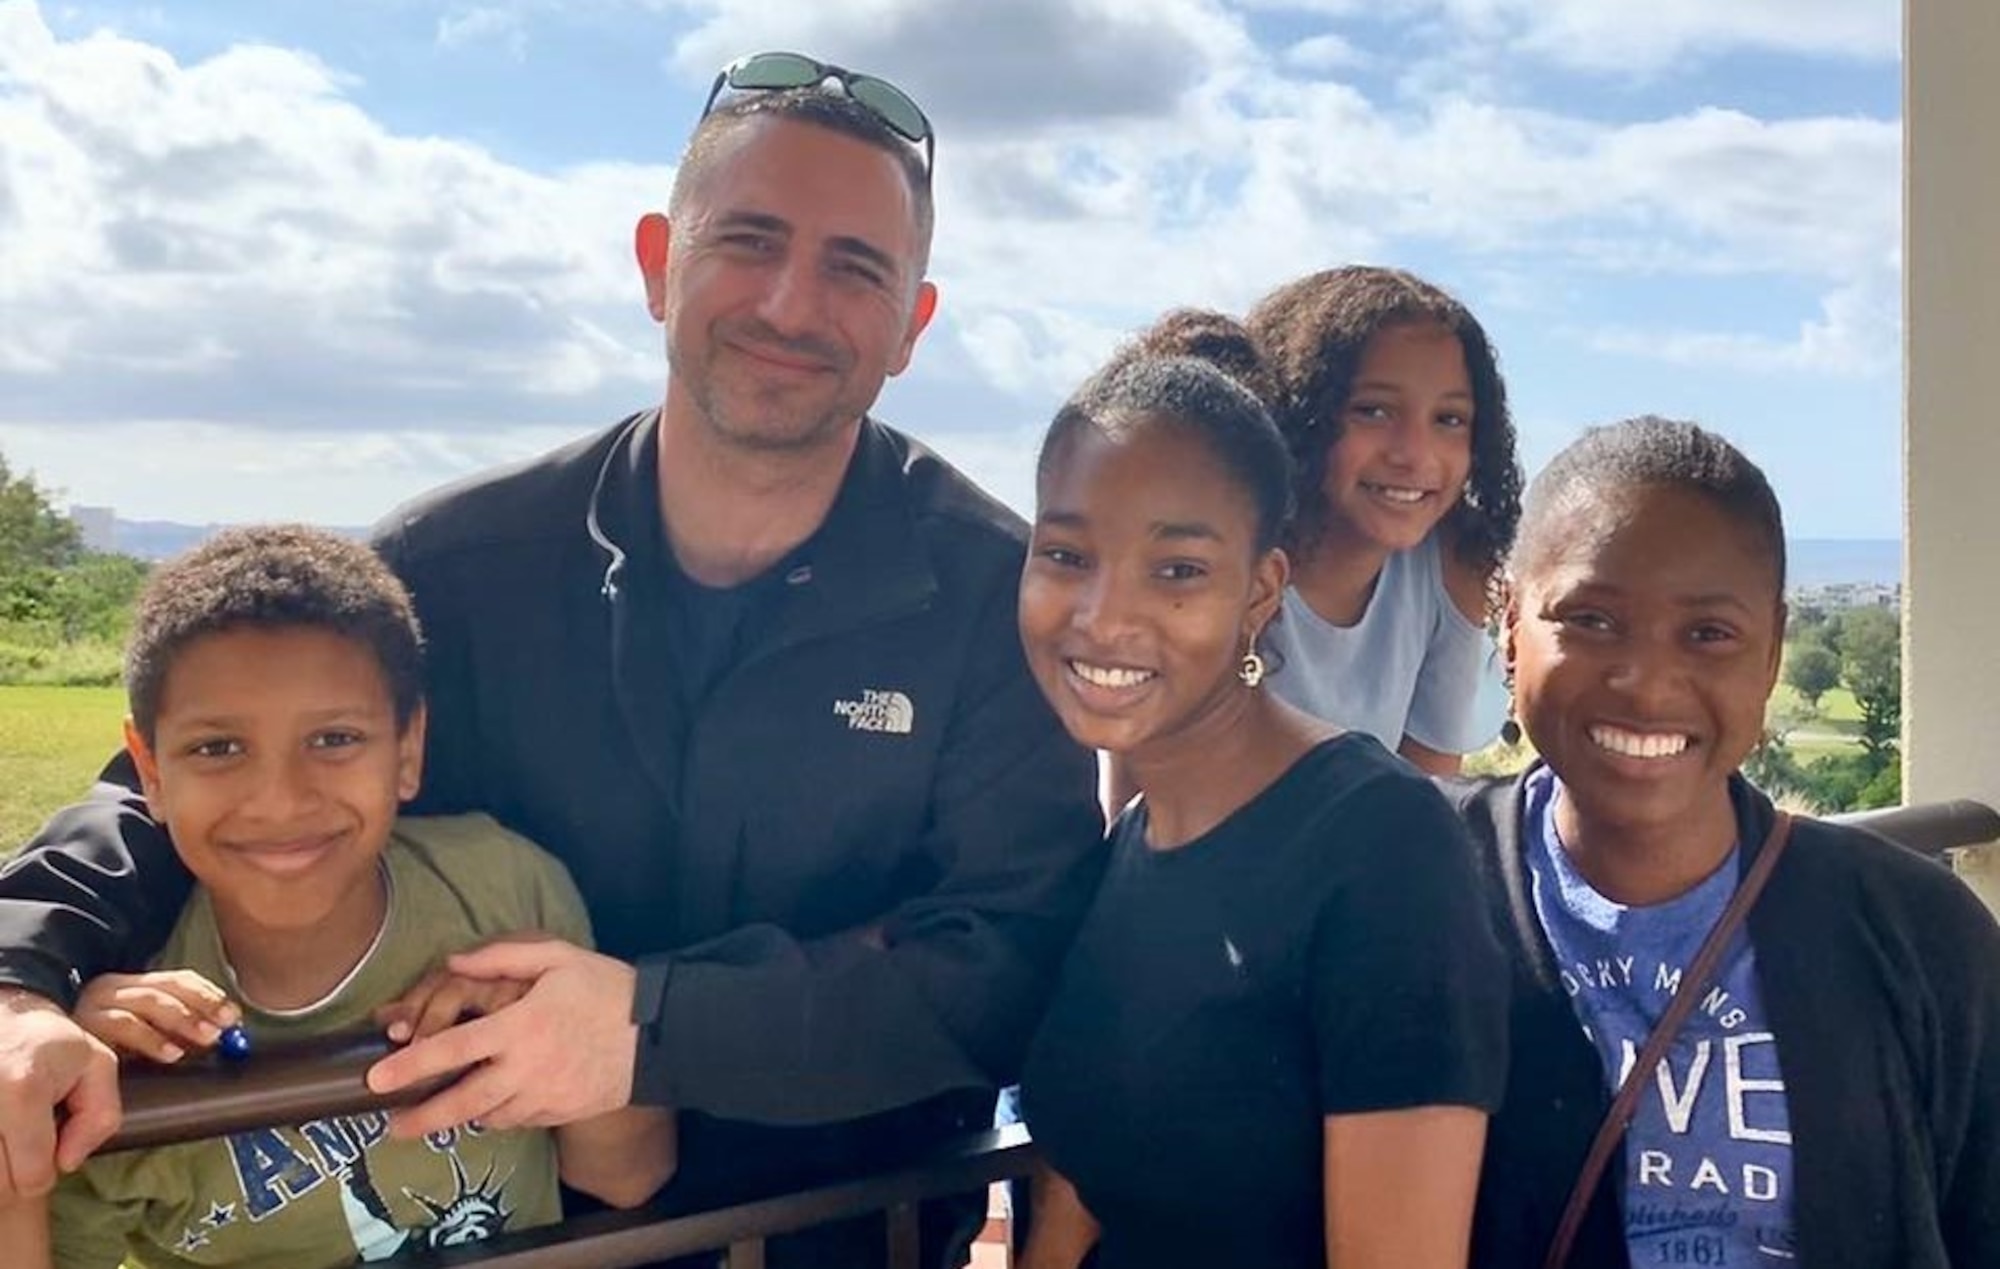 Chief Master Sgt. Brian Kruzelnick, command chief of Air Mobility Command, and (left to right) his son, Javonni (10); daughter, Jahni (15); daughter, La Talya (11); and wife, Kareen. The Kruzelnick's arrived at Scott Air Force Base, Illinois, in August 2020. (Courtesy photo)